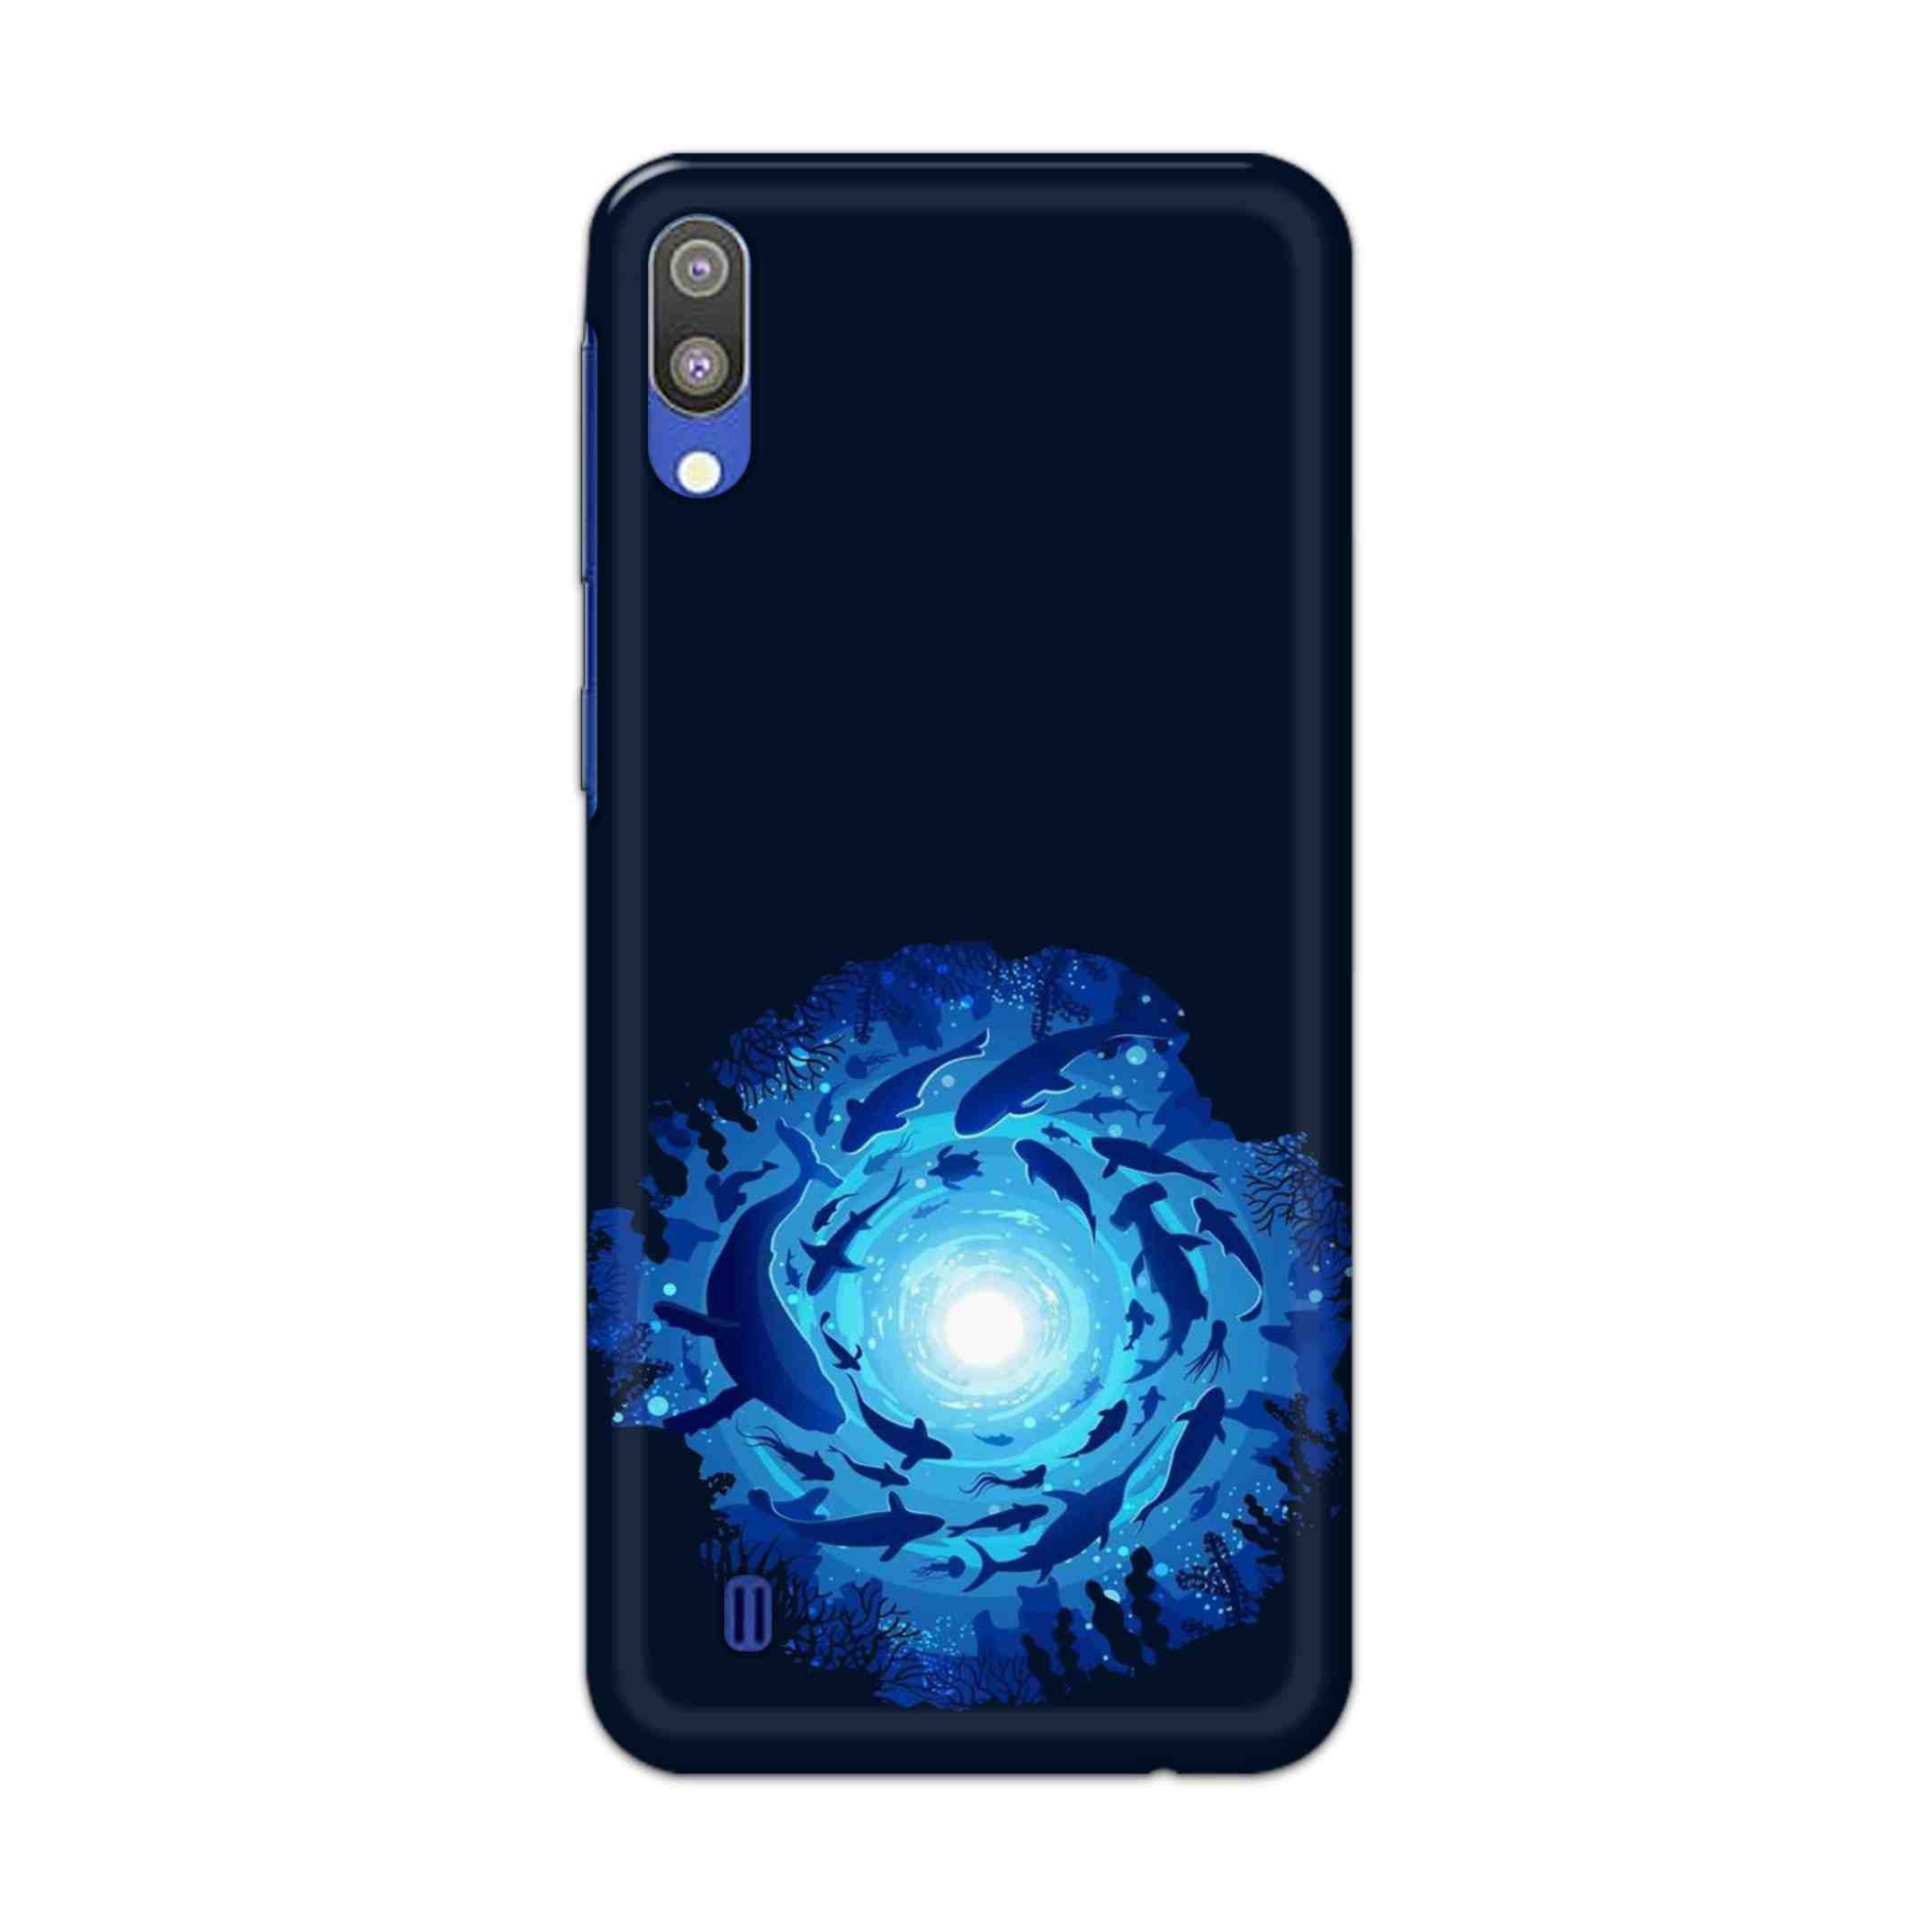 Buy Blue Whale Hard Back Mobile Phone Case Cover For Samsung Galaxy M10 Online